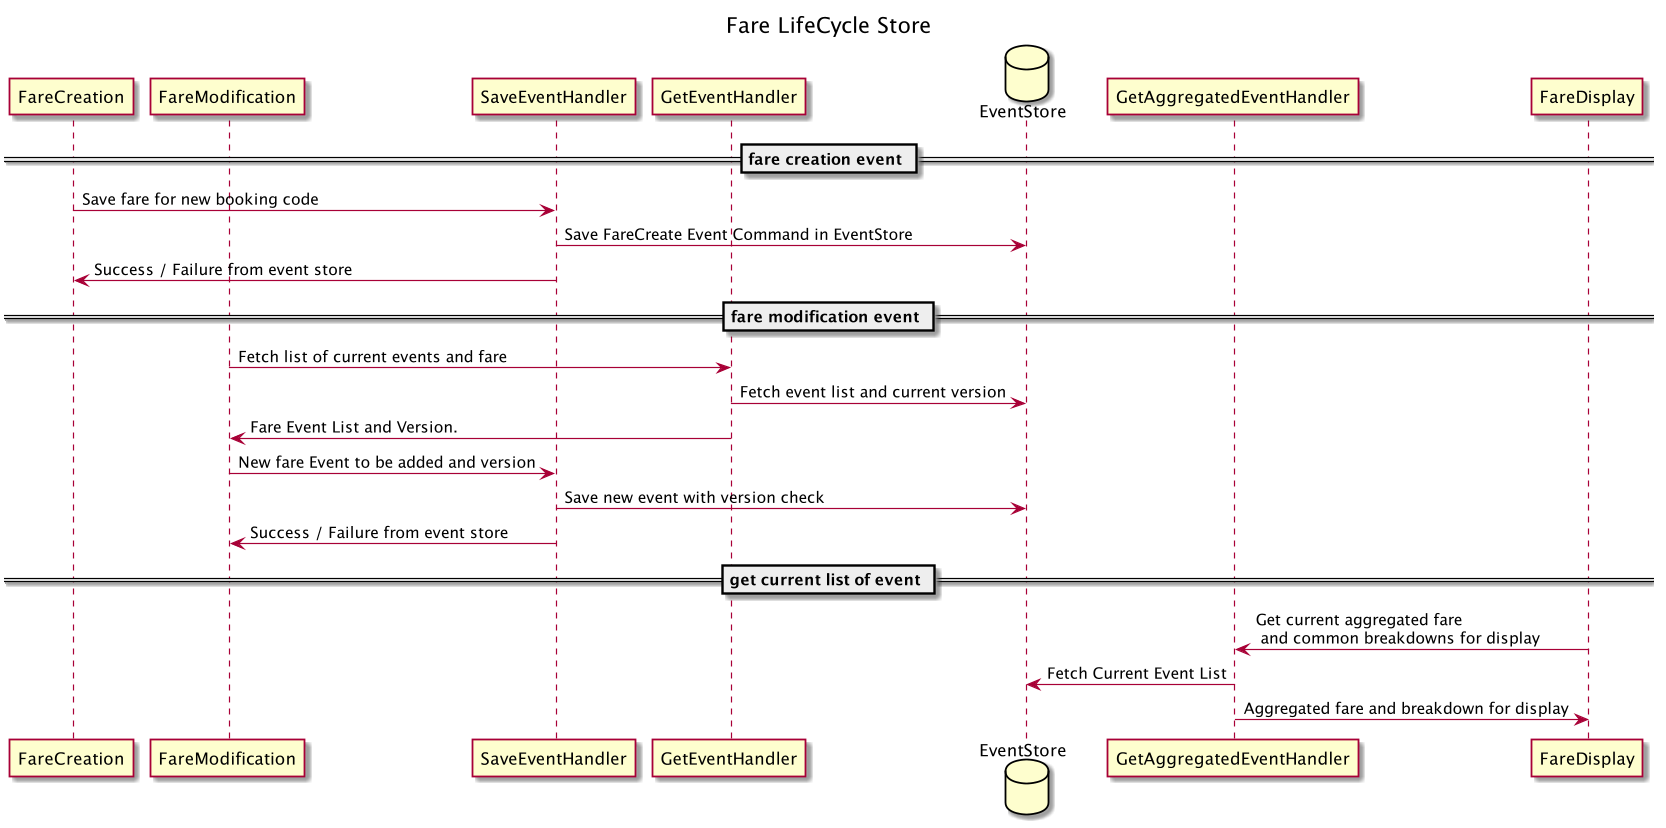 Overall Fare Life Cycle